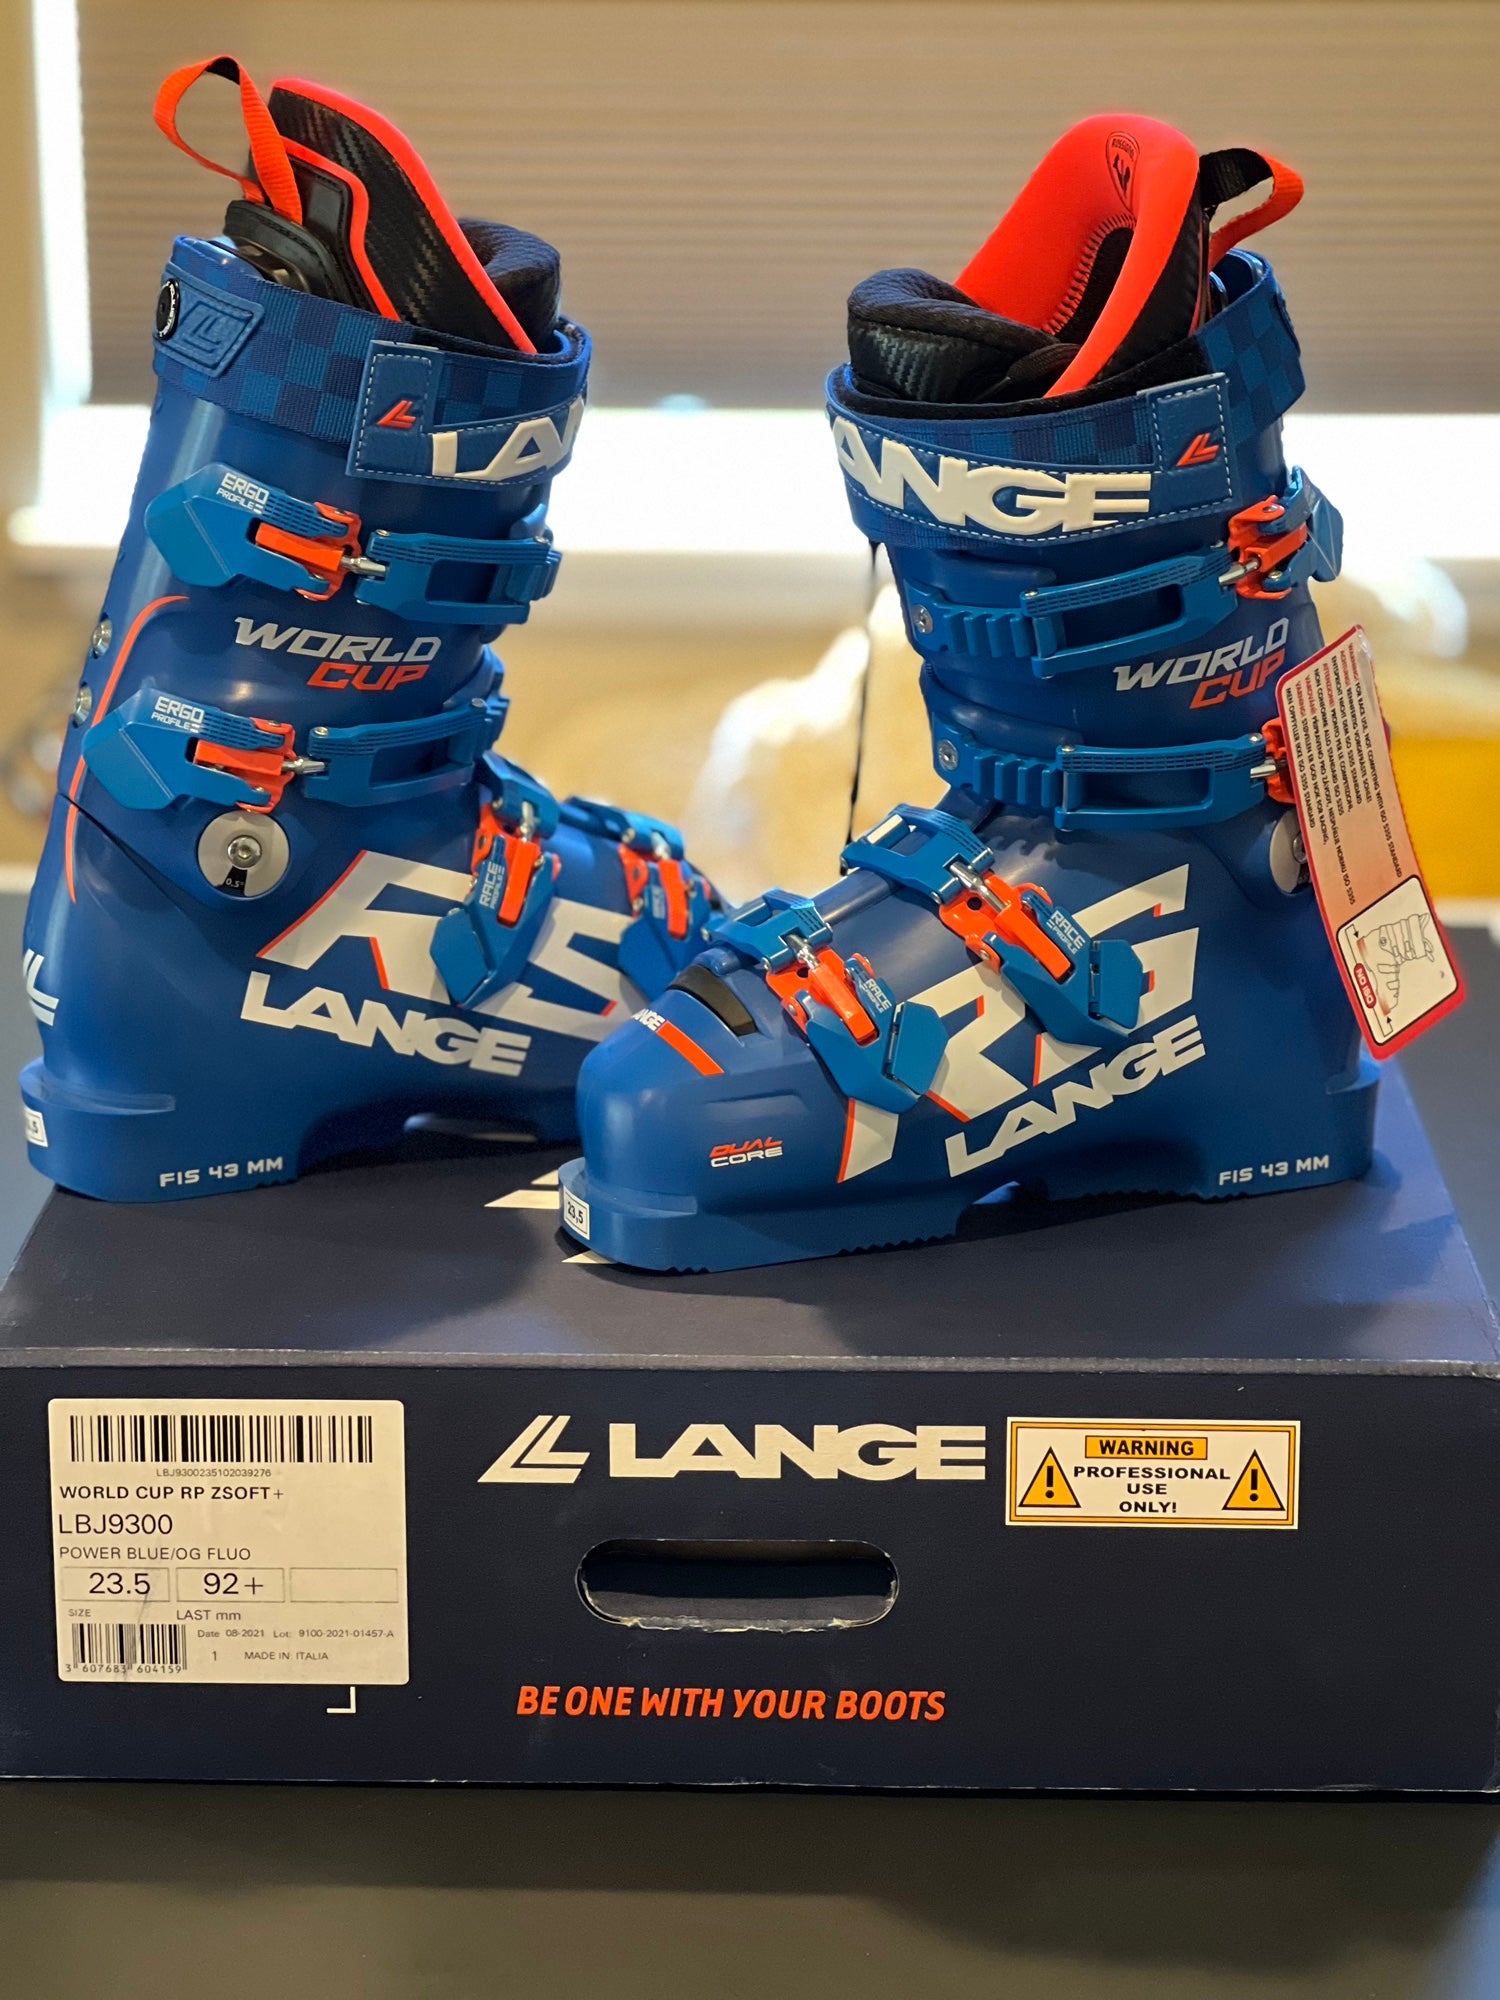 New Lange World Cup Ski Boots RP Zsoft + | SidelineSwap